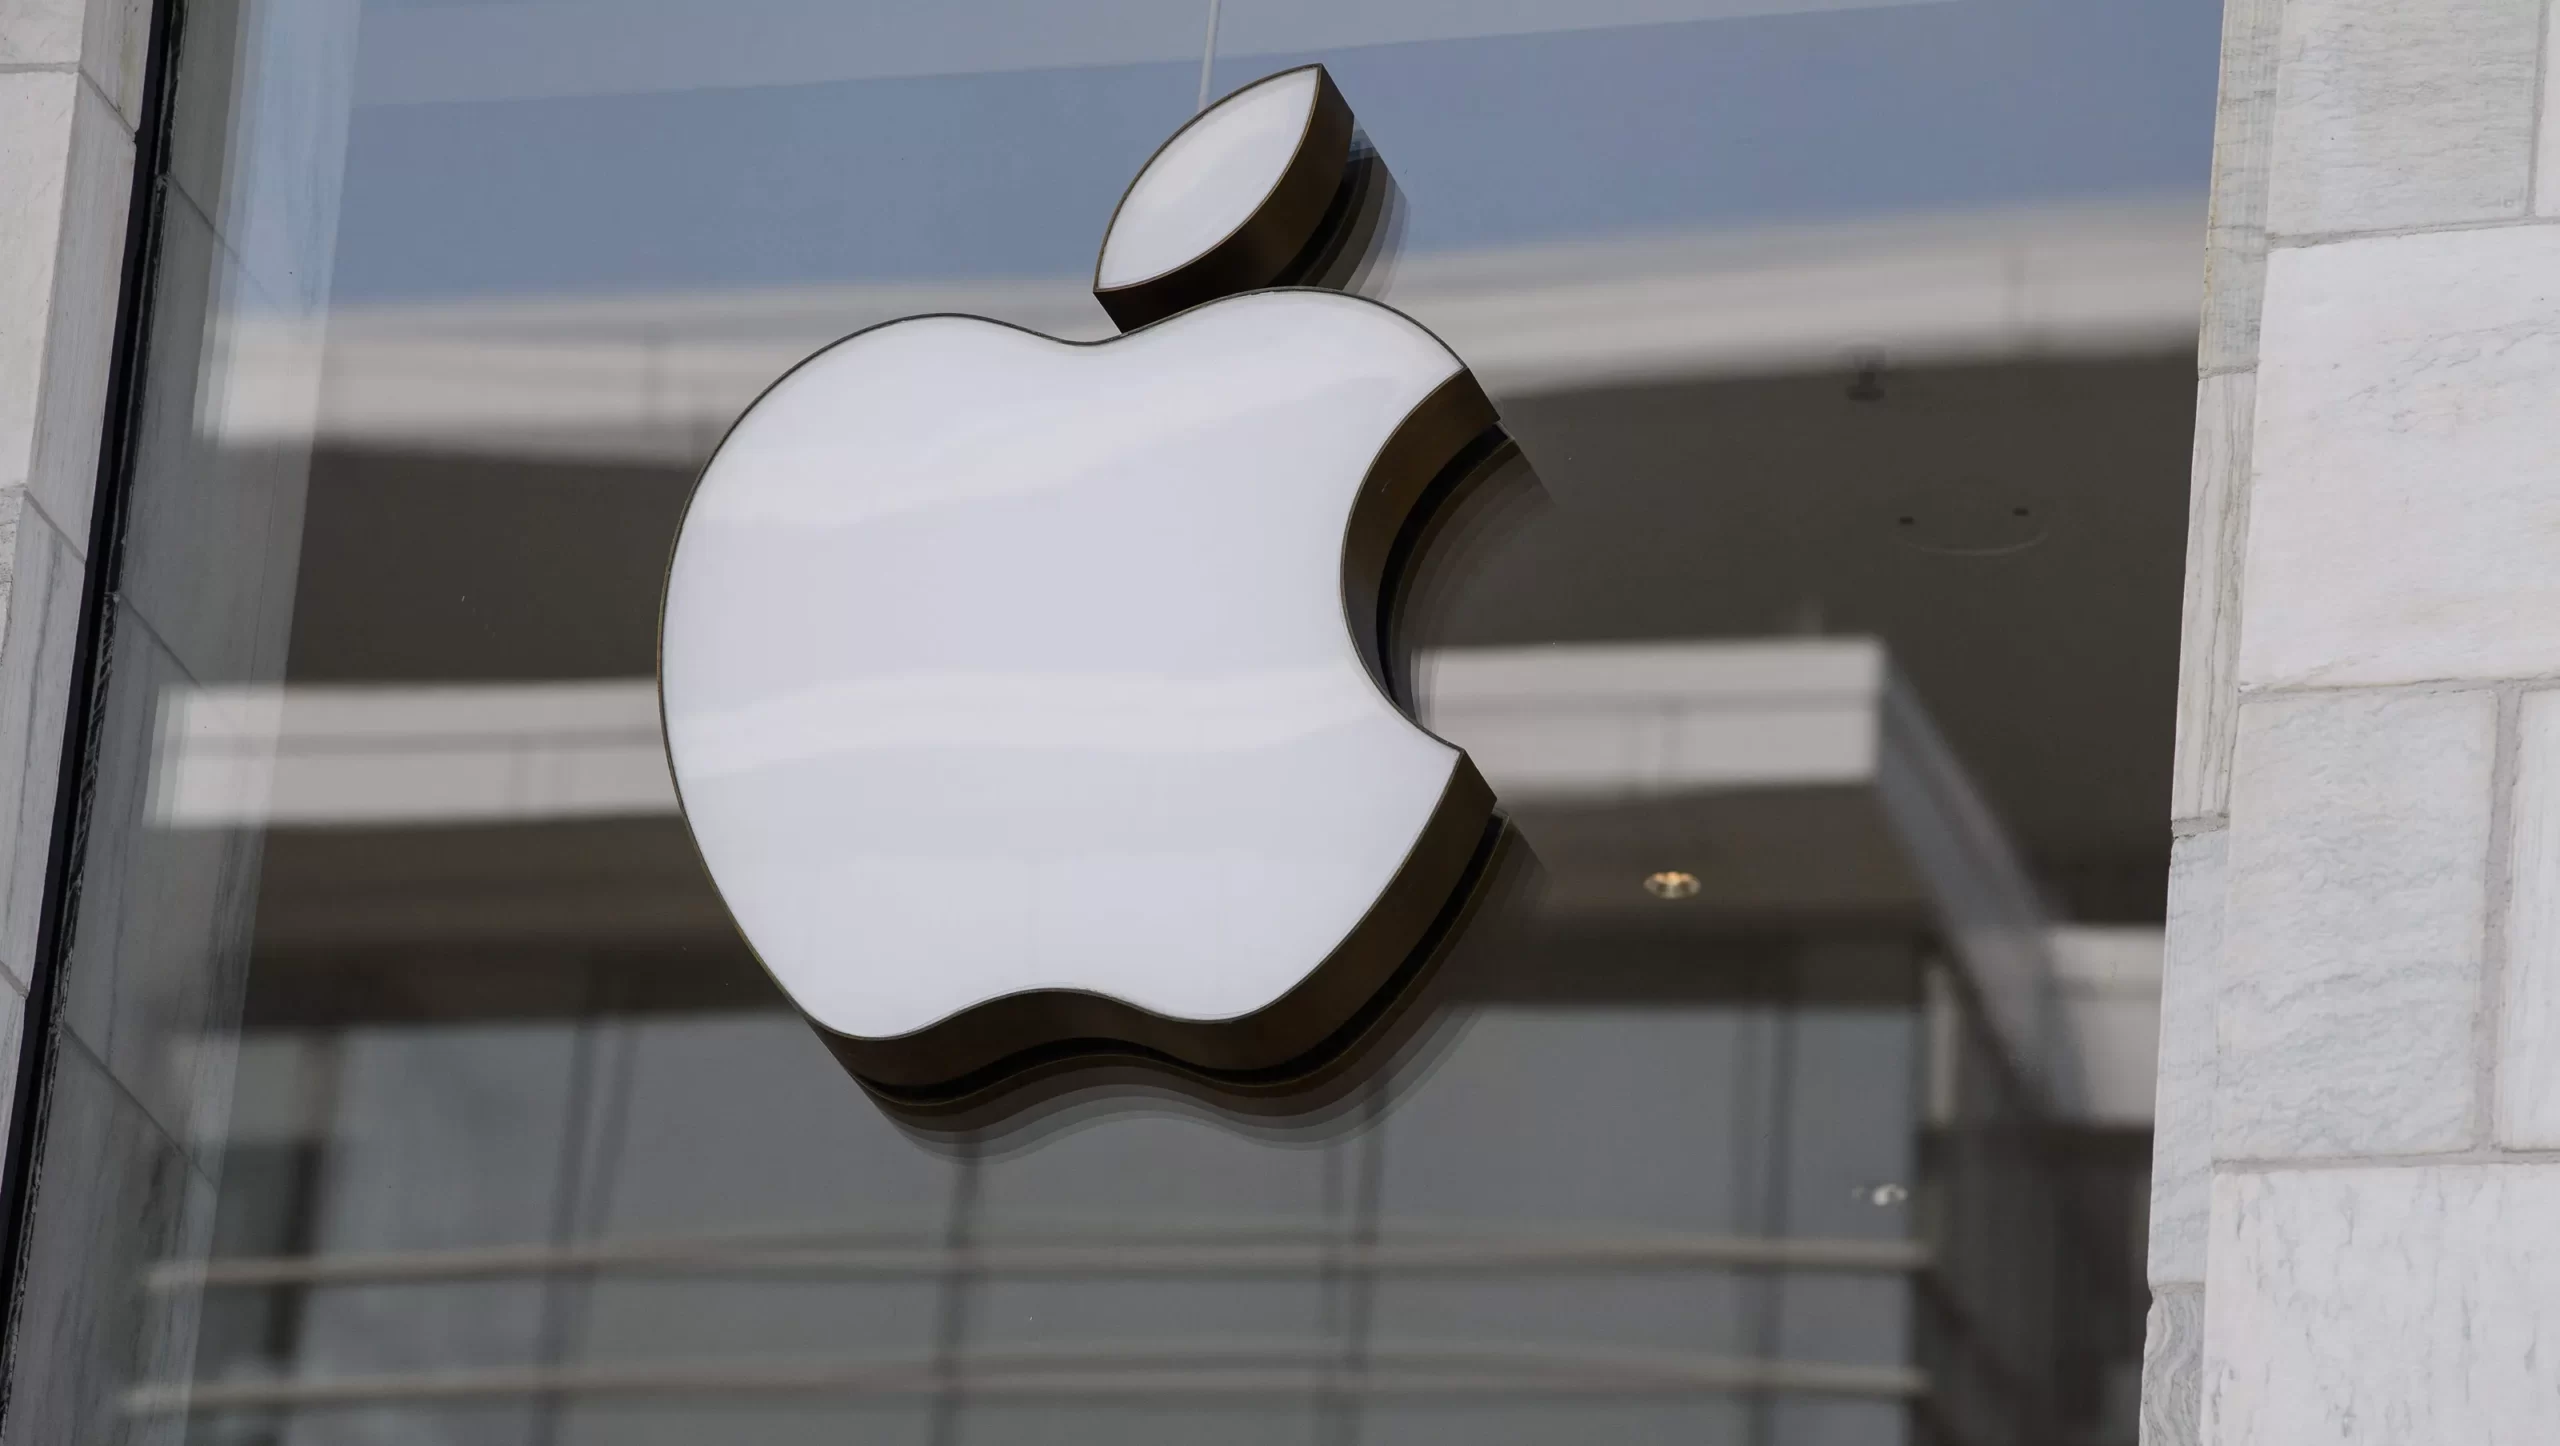 Apple to Send Experts to Join Hacking Threat Notification Probe in India